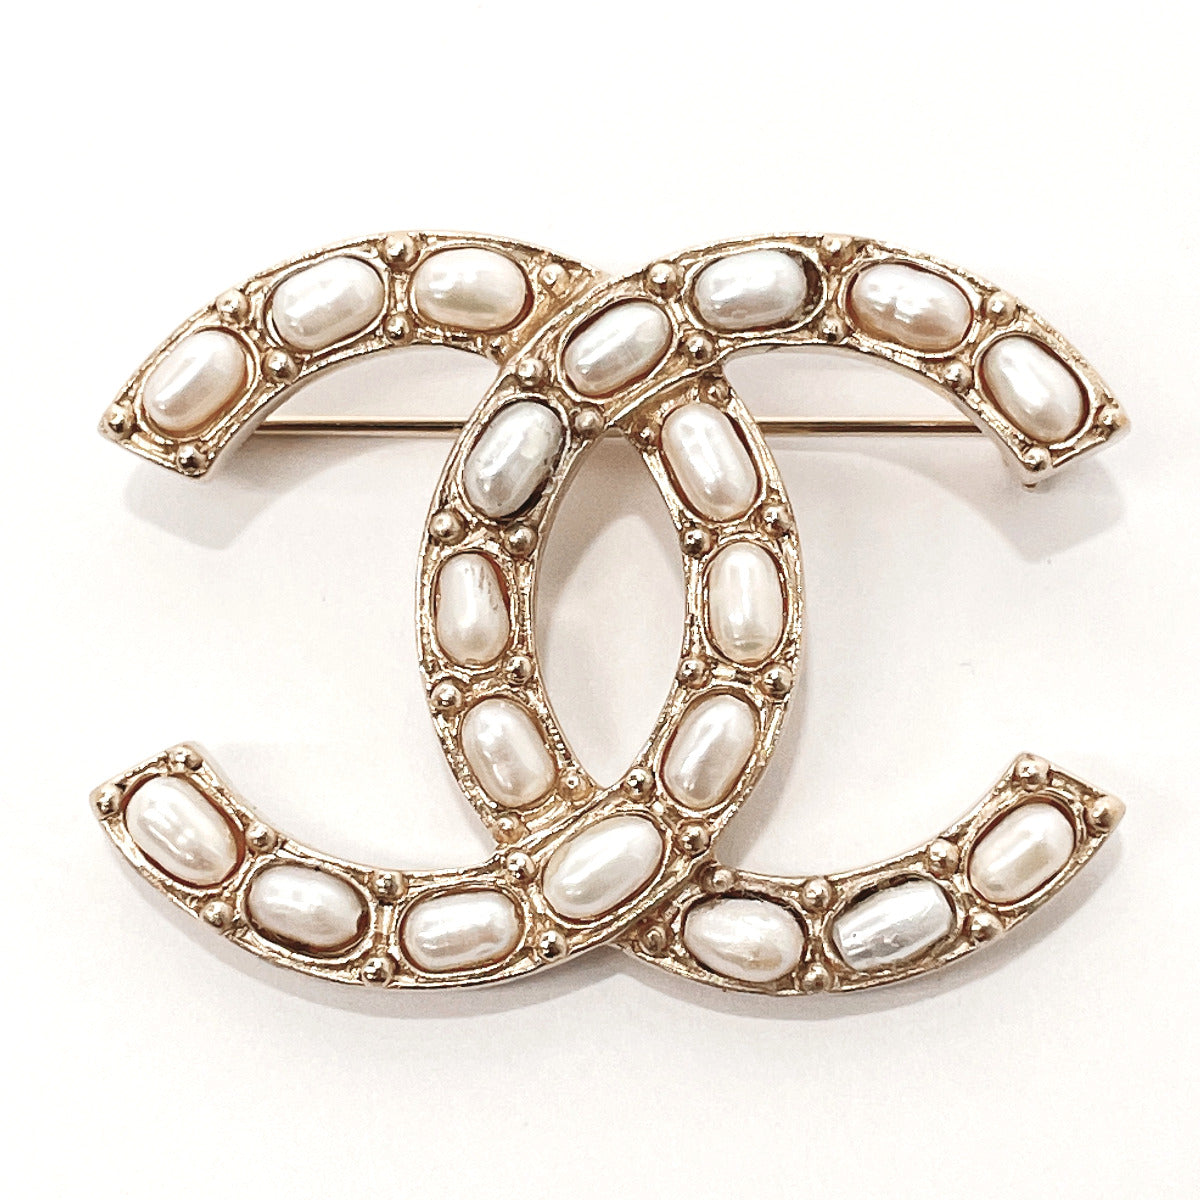 Authenticated Used CHANEL brooch pin here mark rhinestone gold 